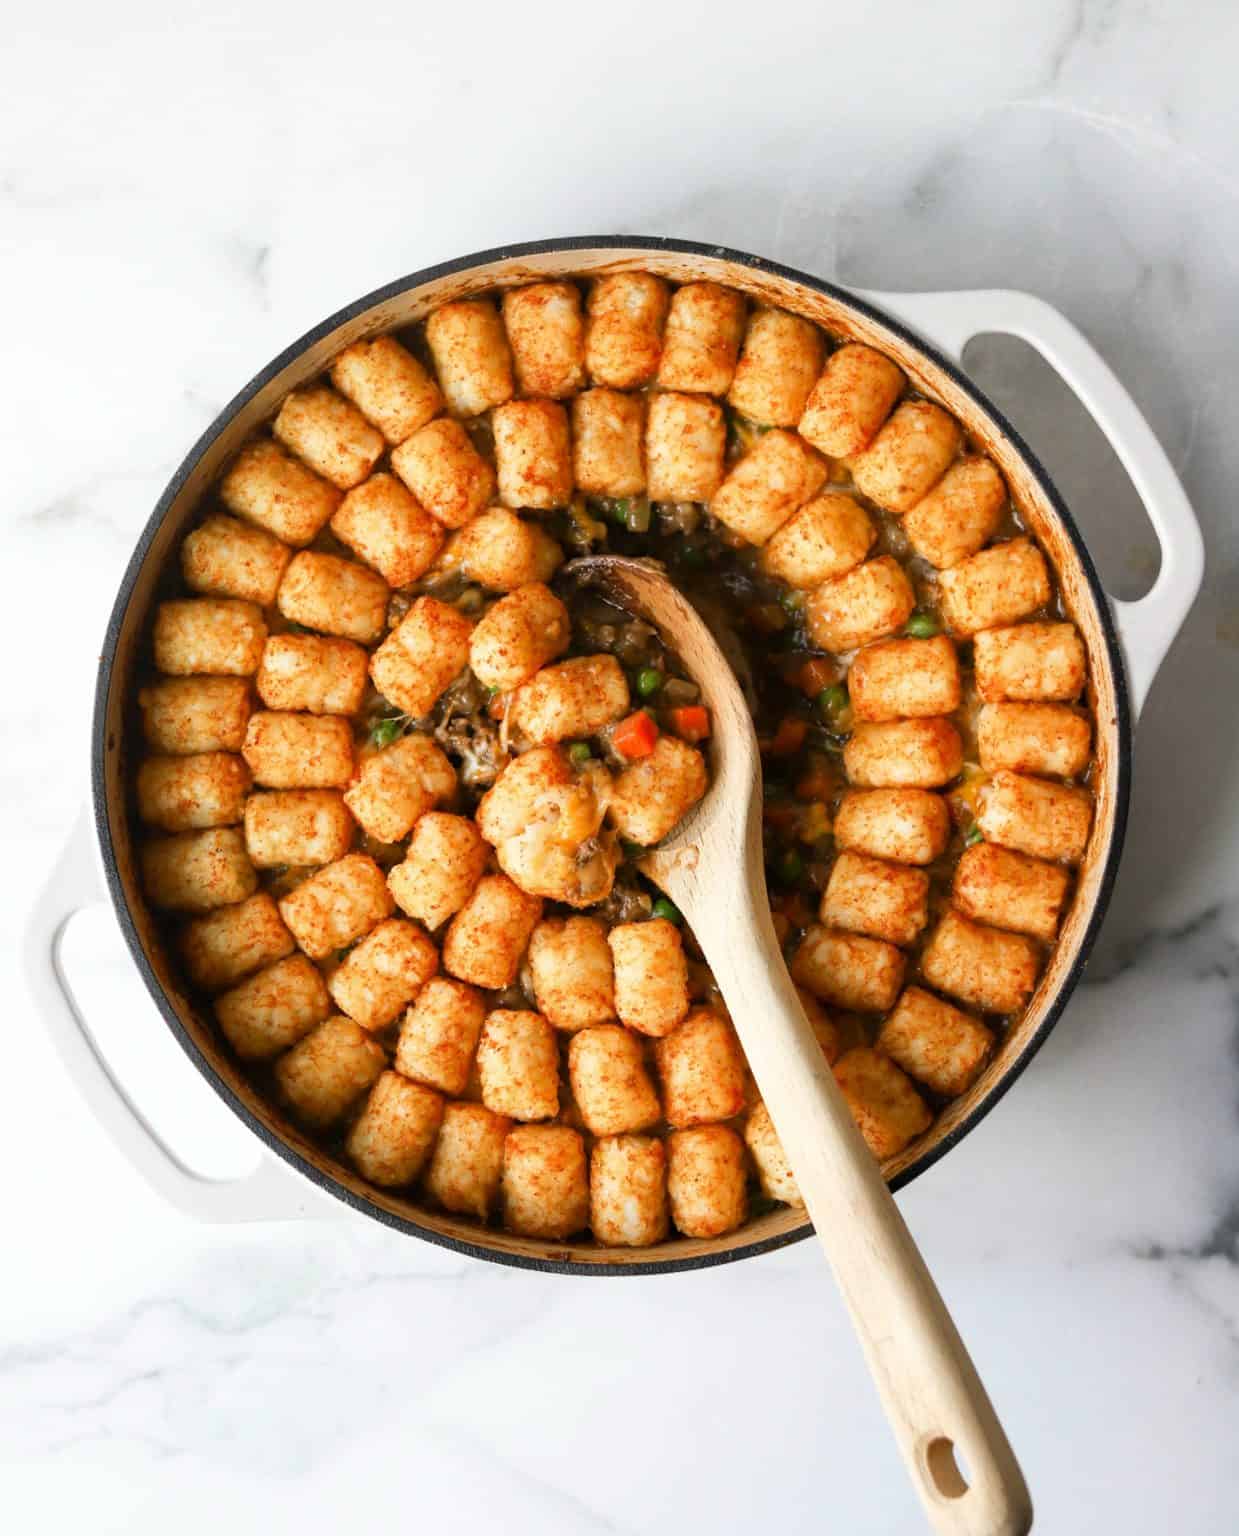 Tater Tot Casserole (No Cream of Soup) - The Healthy Epicurean